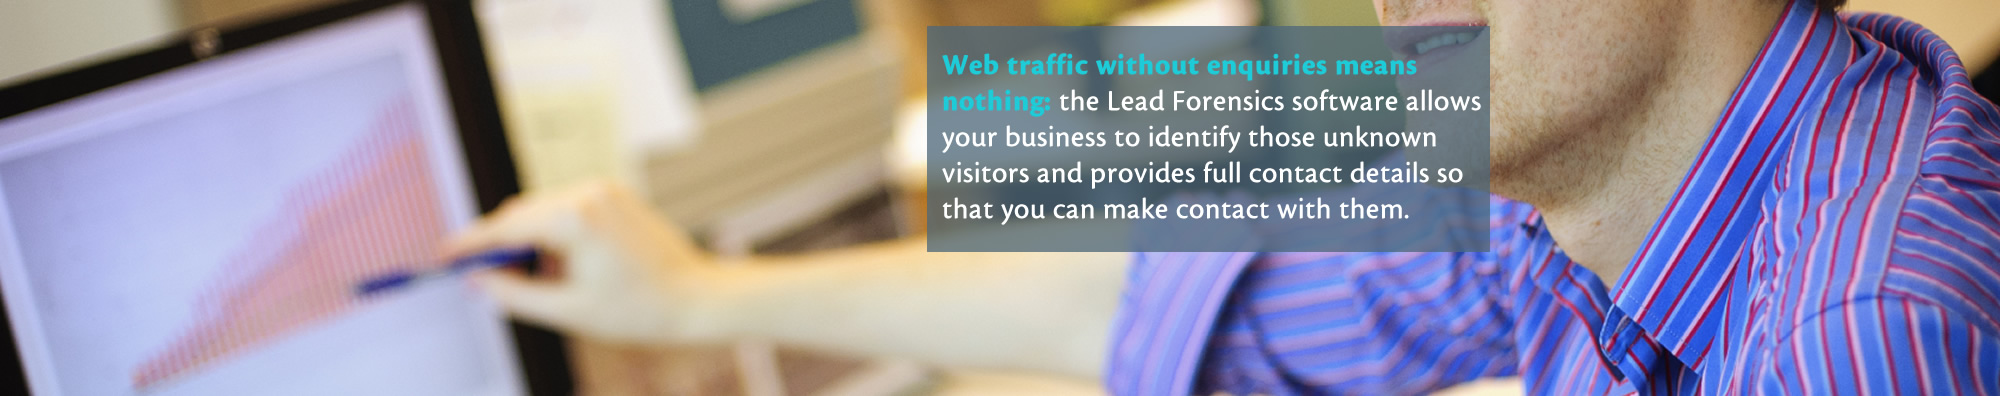 Web traffic without enquiries means nothing: the Lead Forensics software allows your business to identify those unknown visitors and provides full contact details so that you can make contact with them.